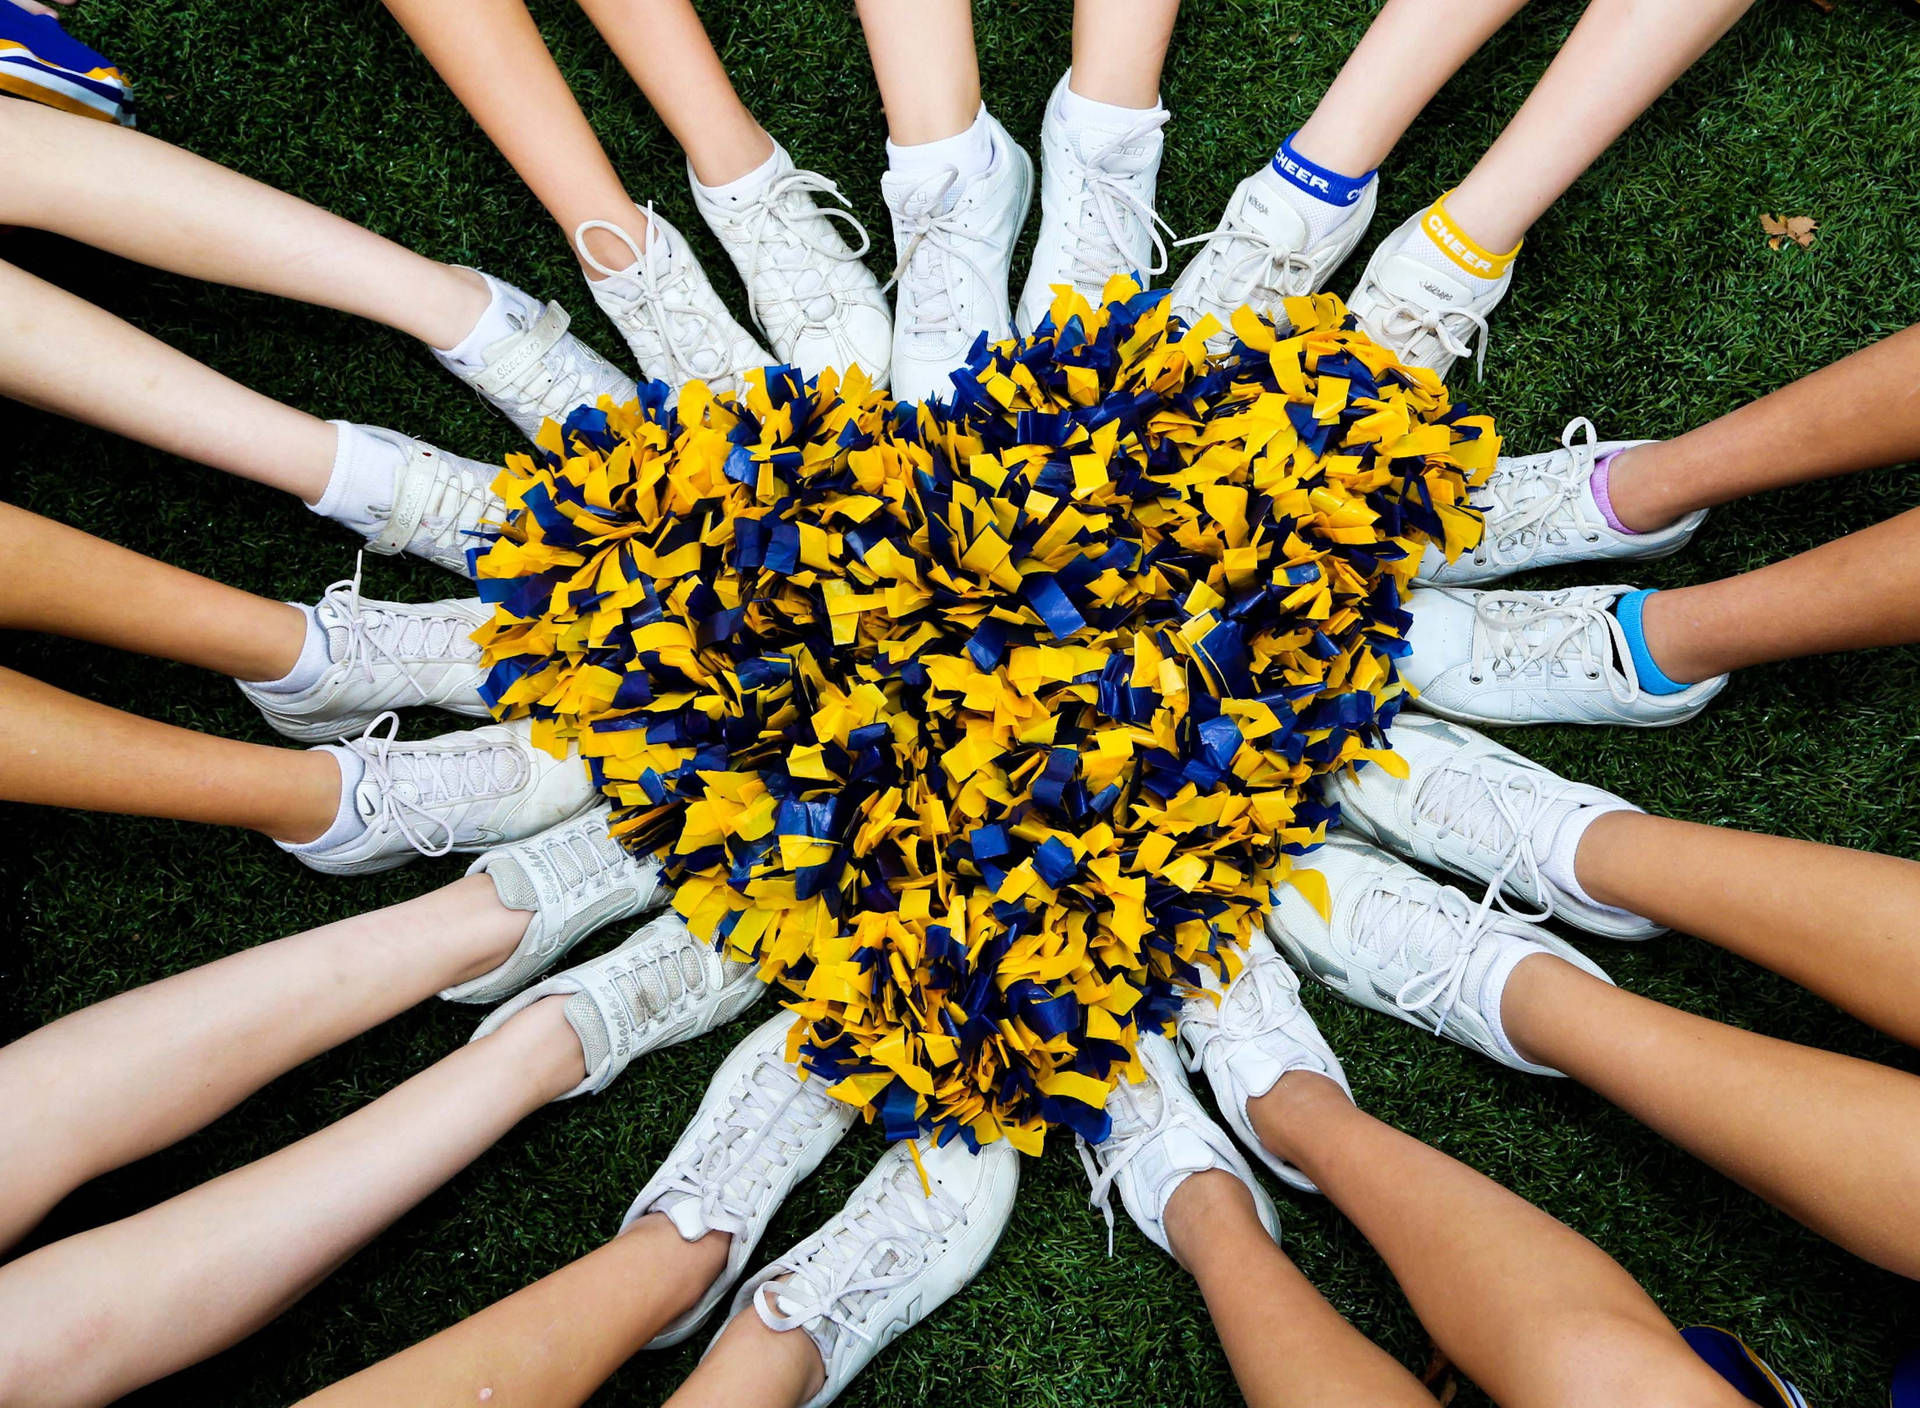 Cheerleader Shoes Forming A Heart